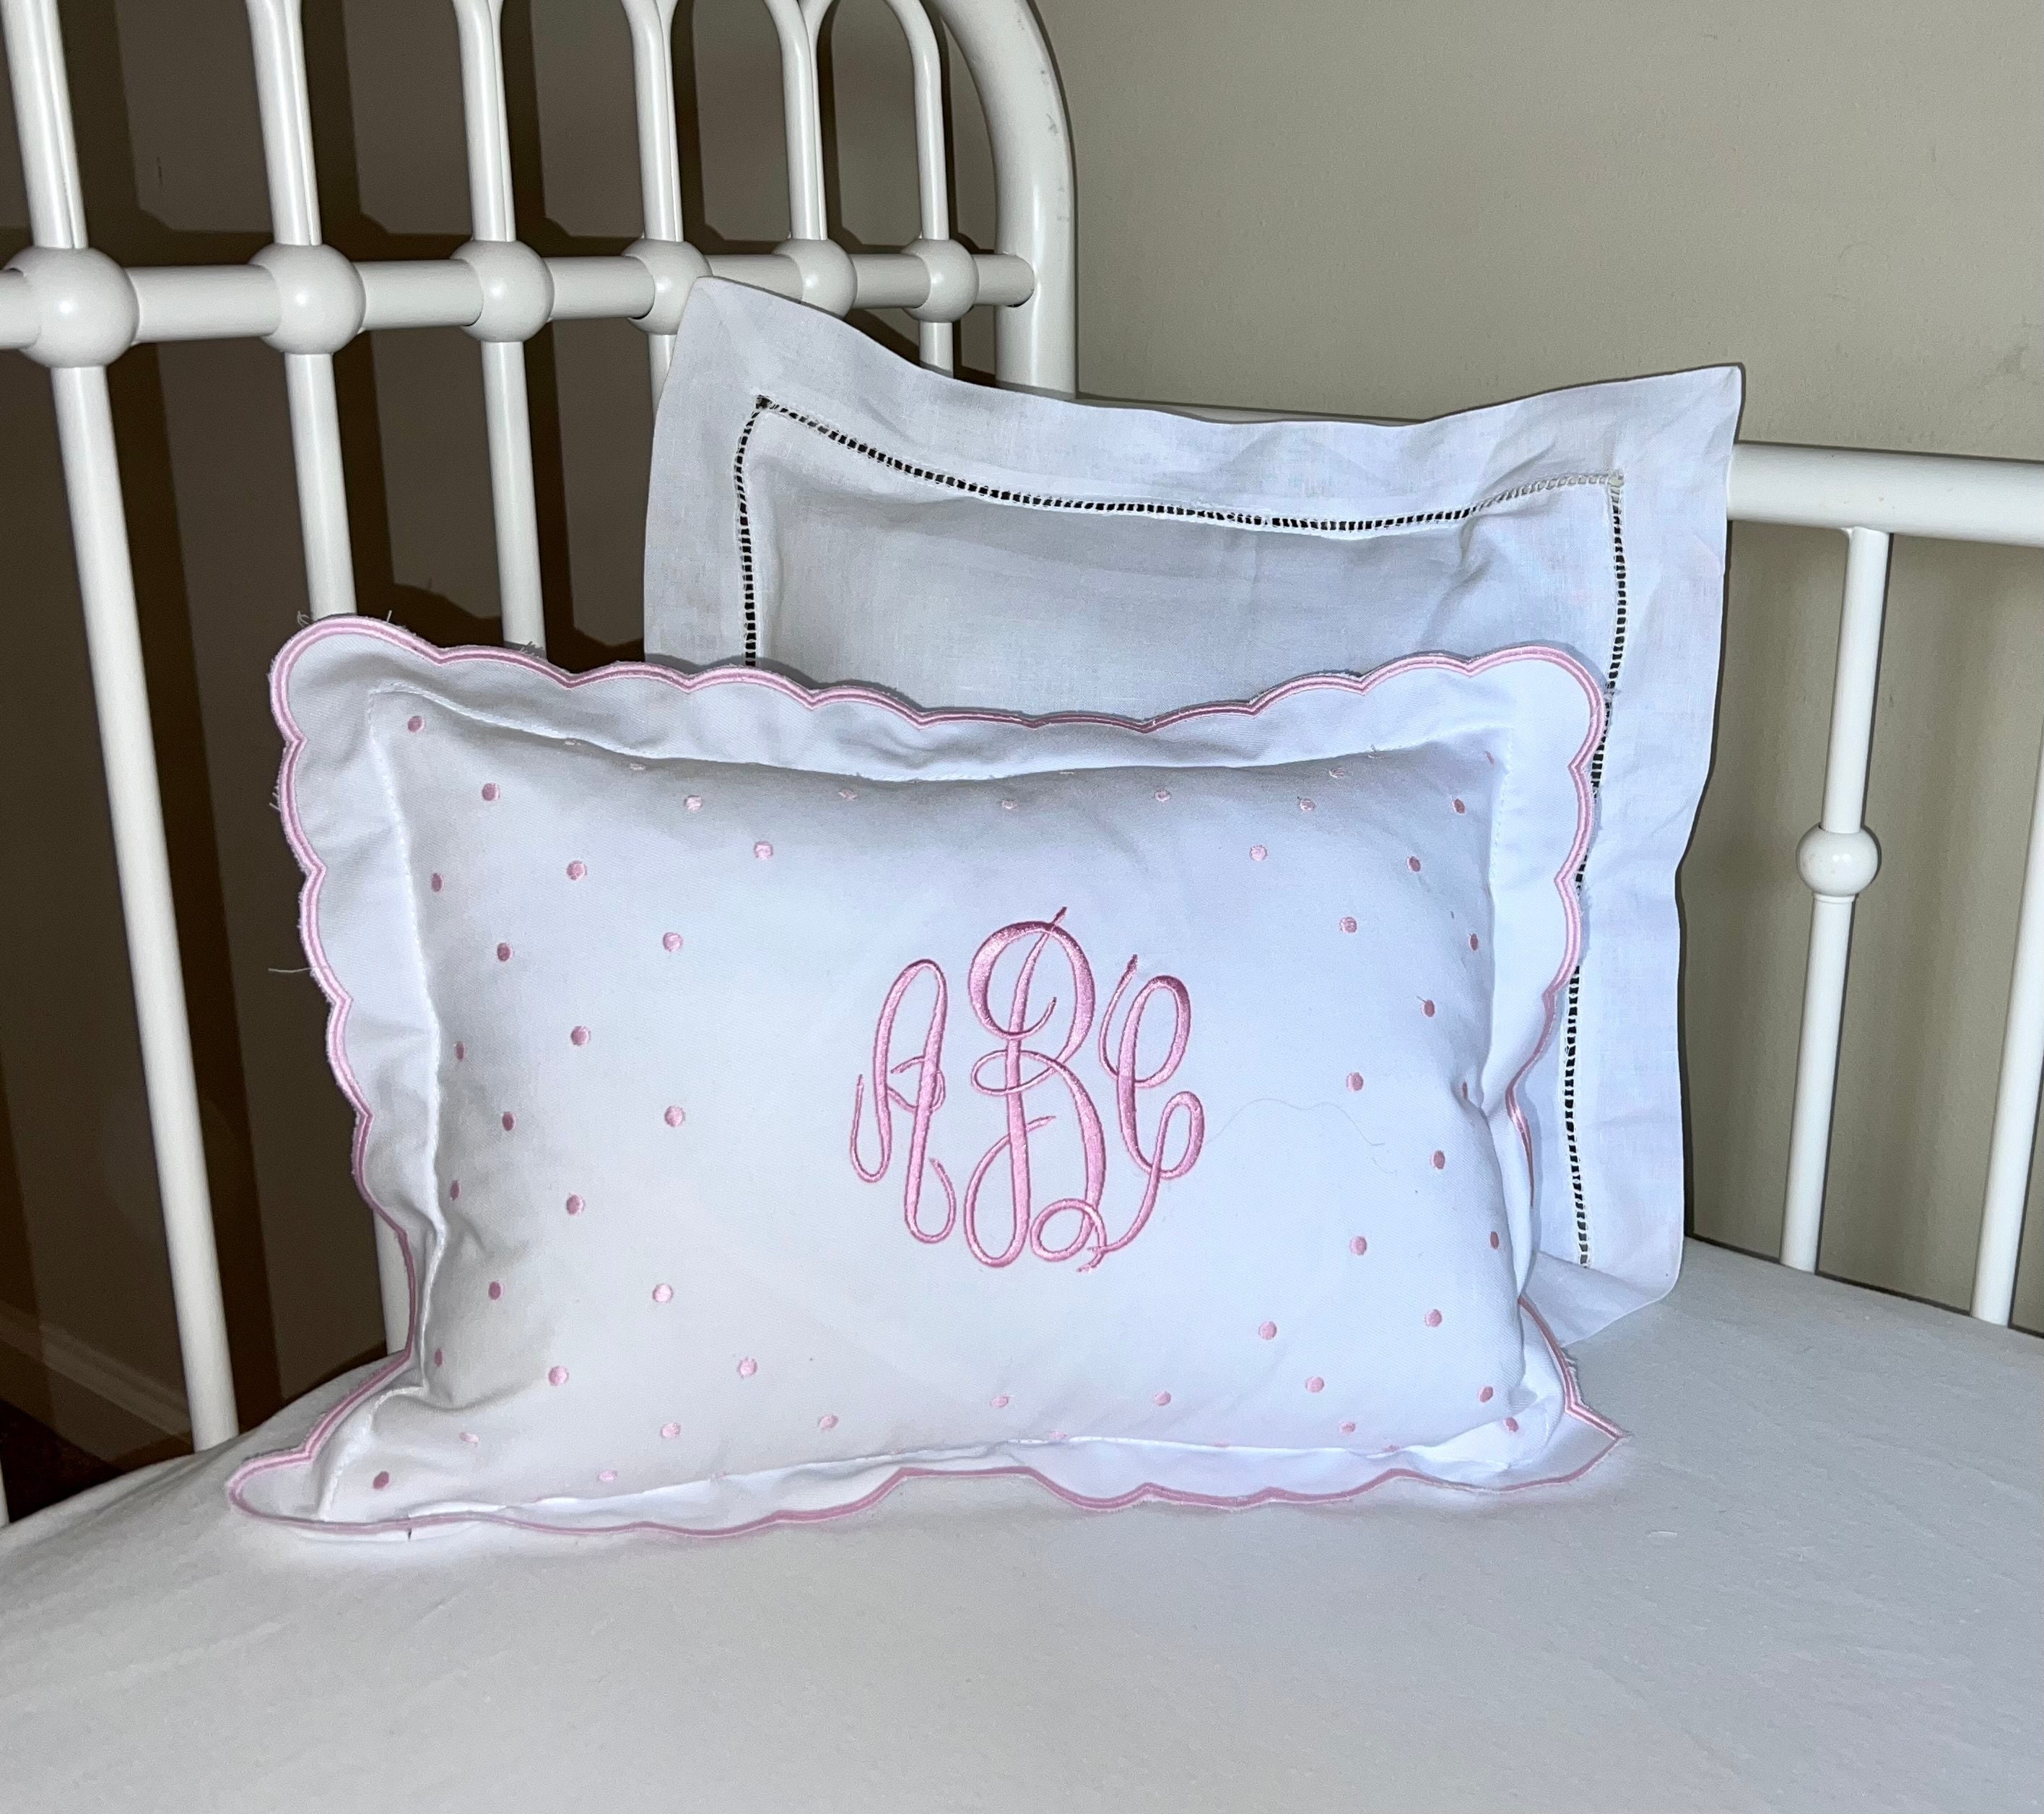 70% OFF Embroidered Monogram Pillow, Personalized gifts, Popular Right Now,  Dorm Decor, Christmas Gift, Housewarming Gift,Wedding Gift Ideas